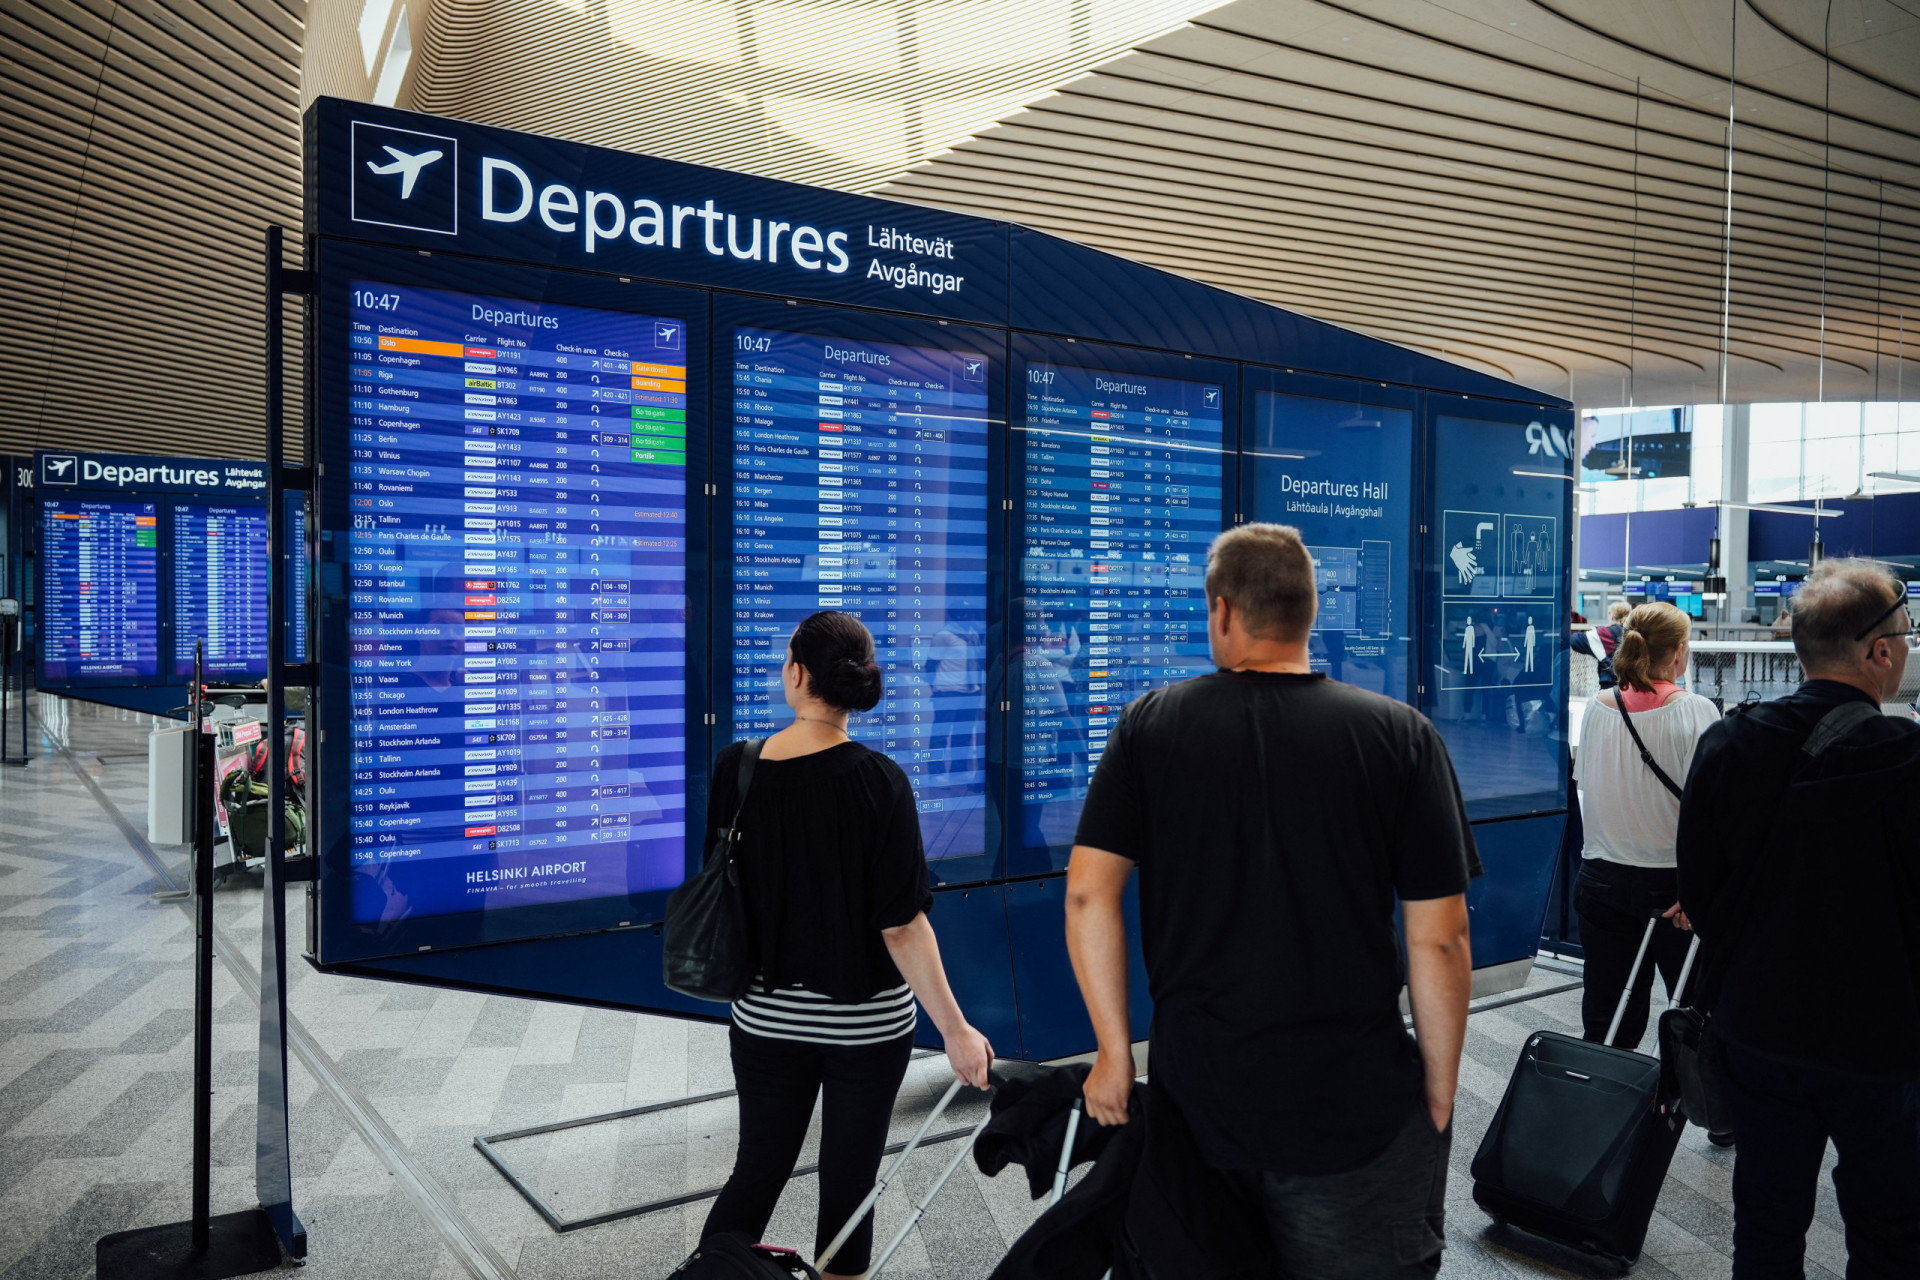 <p>While business class offers high-ranking services and amenities in the skies, <a href="https://www.starsinsider.com/travel/505384/ways-to-kill-time-at-the-airport" rel="noopener">airports</a> themselves can be daunting environments. Managed by various entities and catering to a diverse clientele, these travel hubs very often prioritize functionality over comfort. To shed light on airport experiences, BusinessFinancing.co.uk conducted a comprehensive study of the best and worst airports around the world based on business travelers' reviews. Spoiler alert: the majority of the most poorly ranked airports are located in the US and the UK!</p> <p>Curious? Click on to discover the best and worst airports in the world.</p><p>You may also like:<a href="https://www.starsinsider.com/n/198574?utm_source=msn.com&utm_medium=display&utm_campaign=referral_description&utm_content=696237en-en"> What's new on Netflix UK in April</a></p>